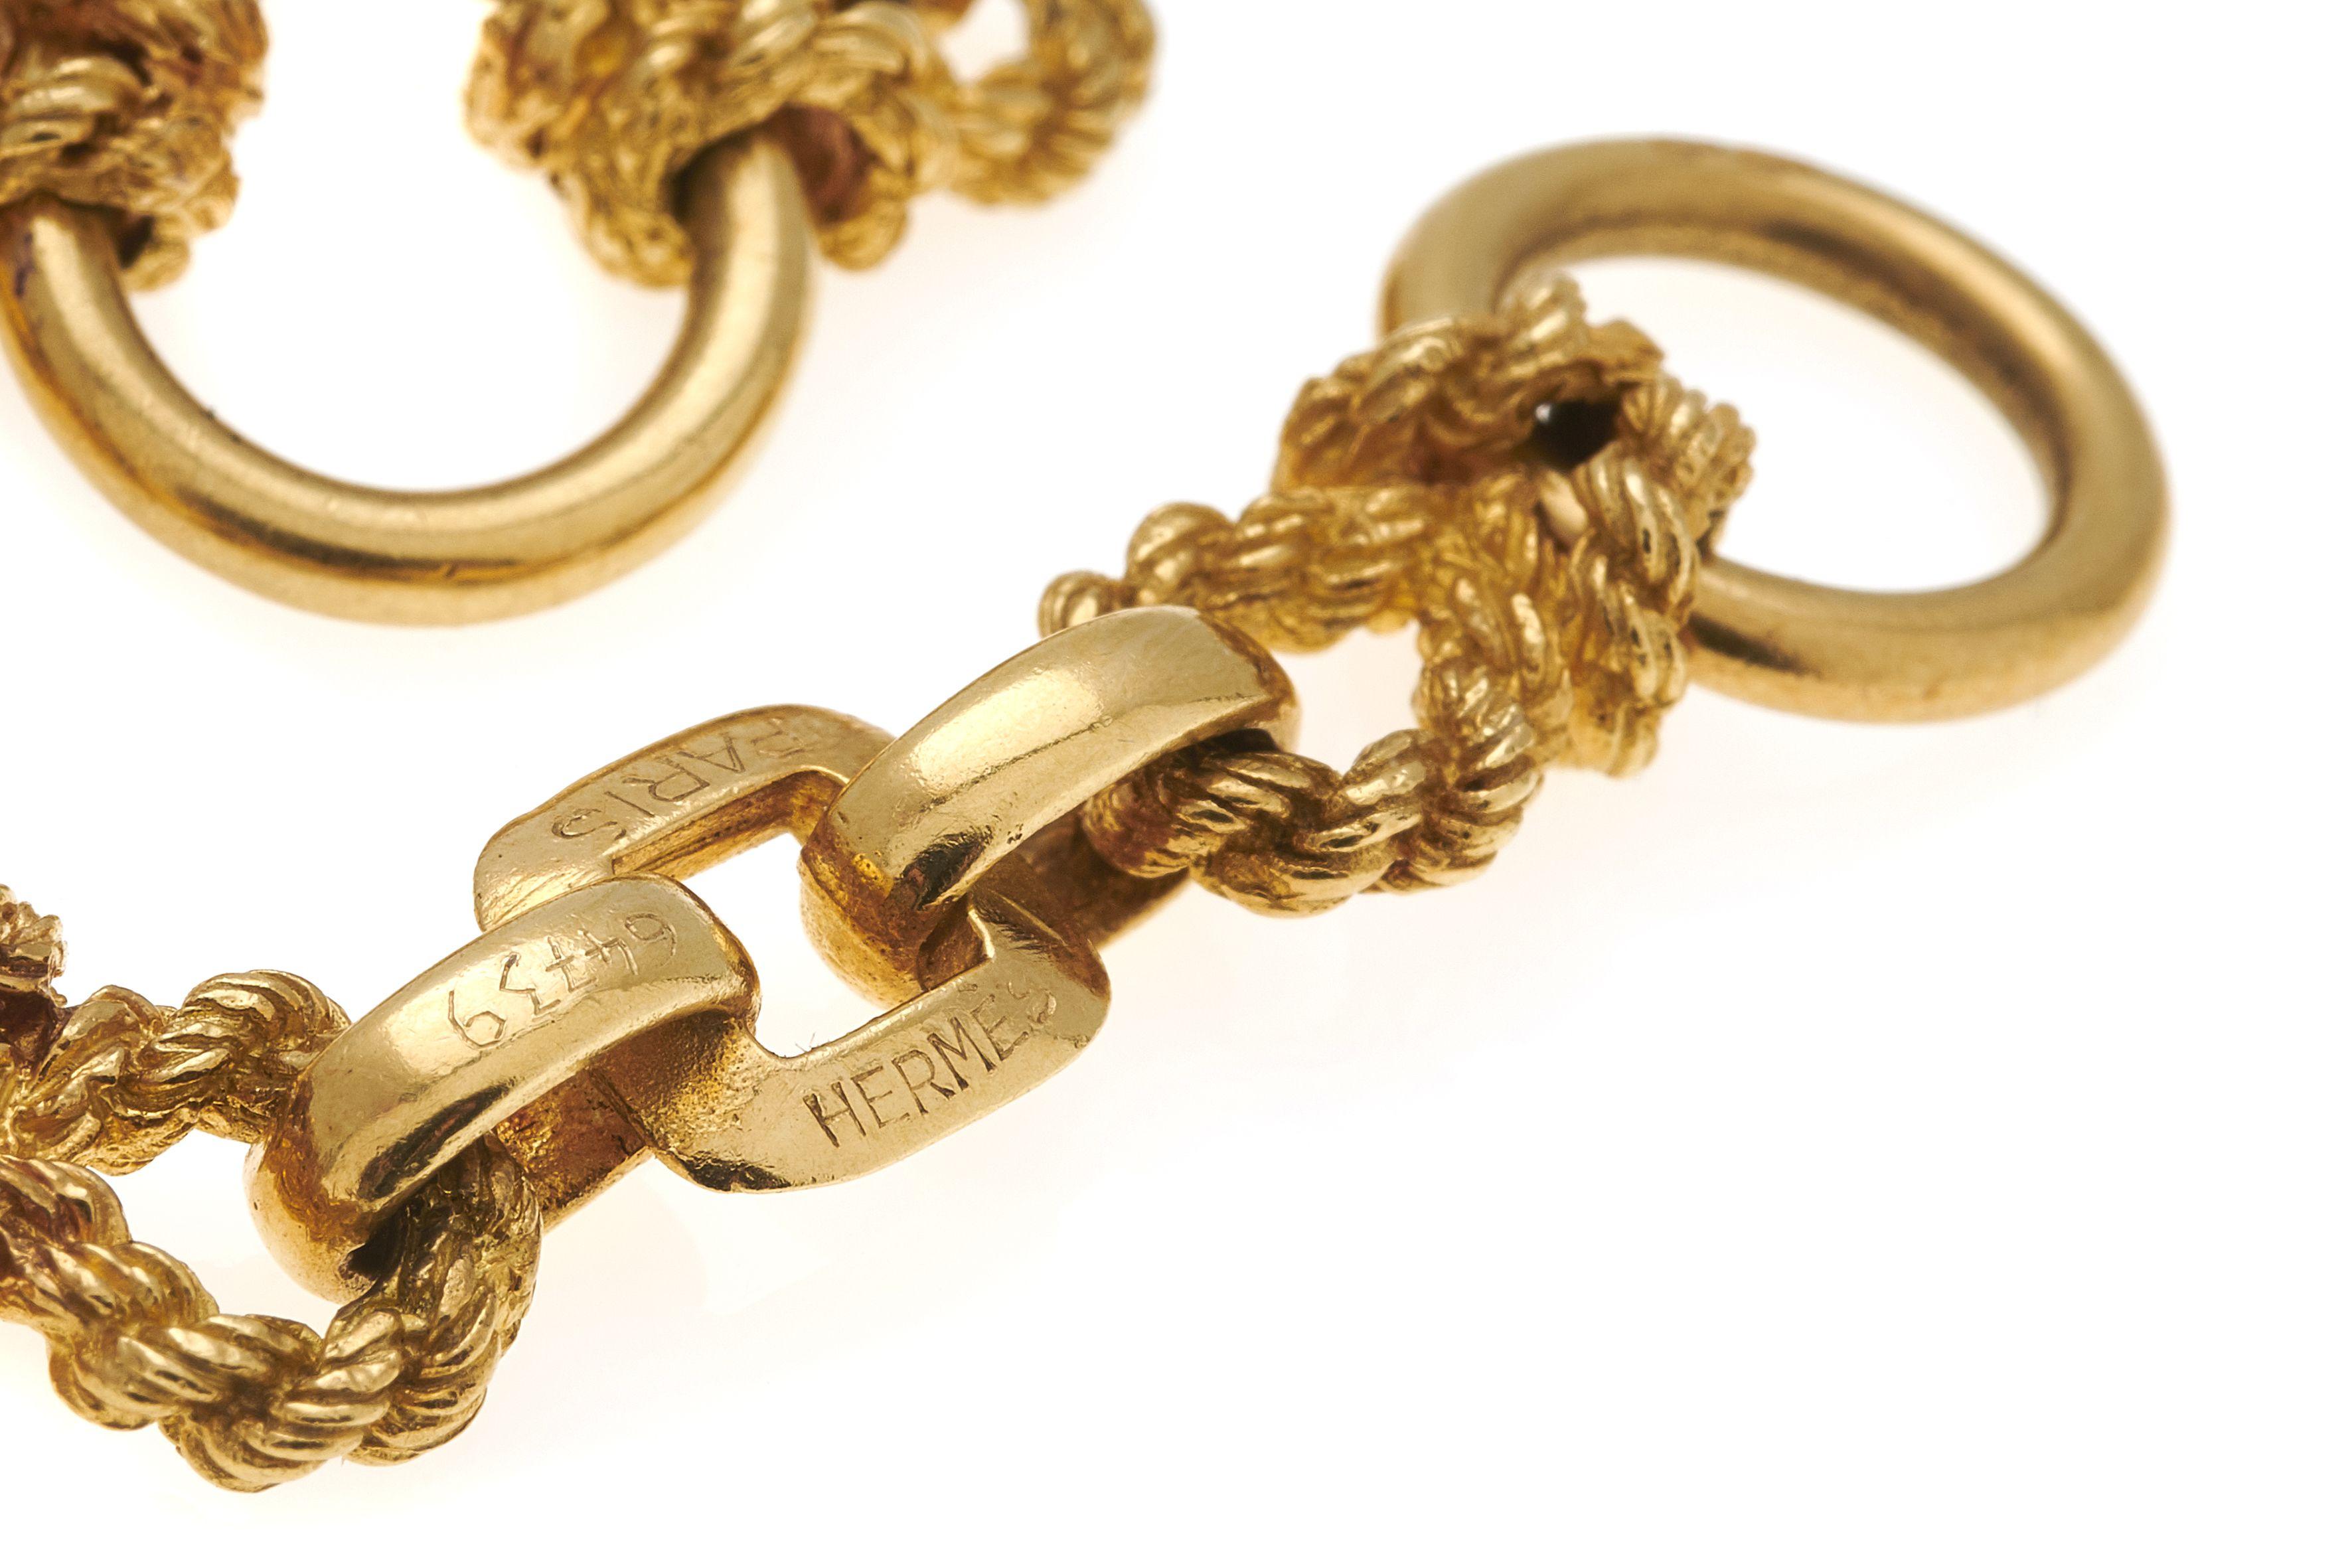 Hermès necklace and bracelet set -1970s yellow gold nautical rope knot link  For Sale 4